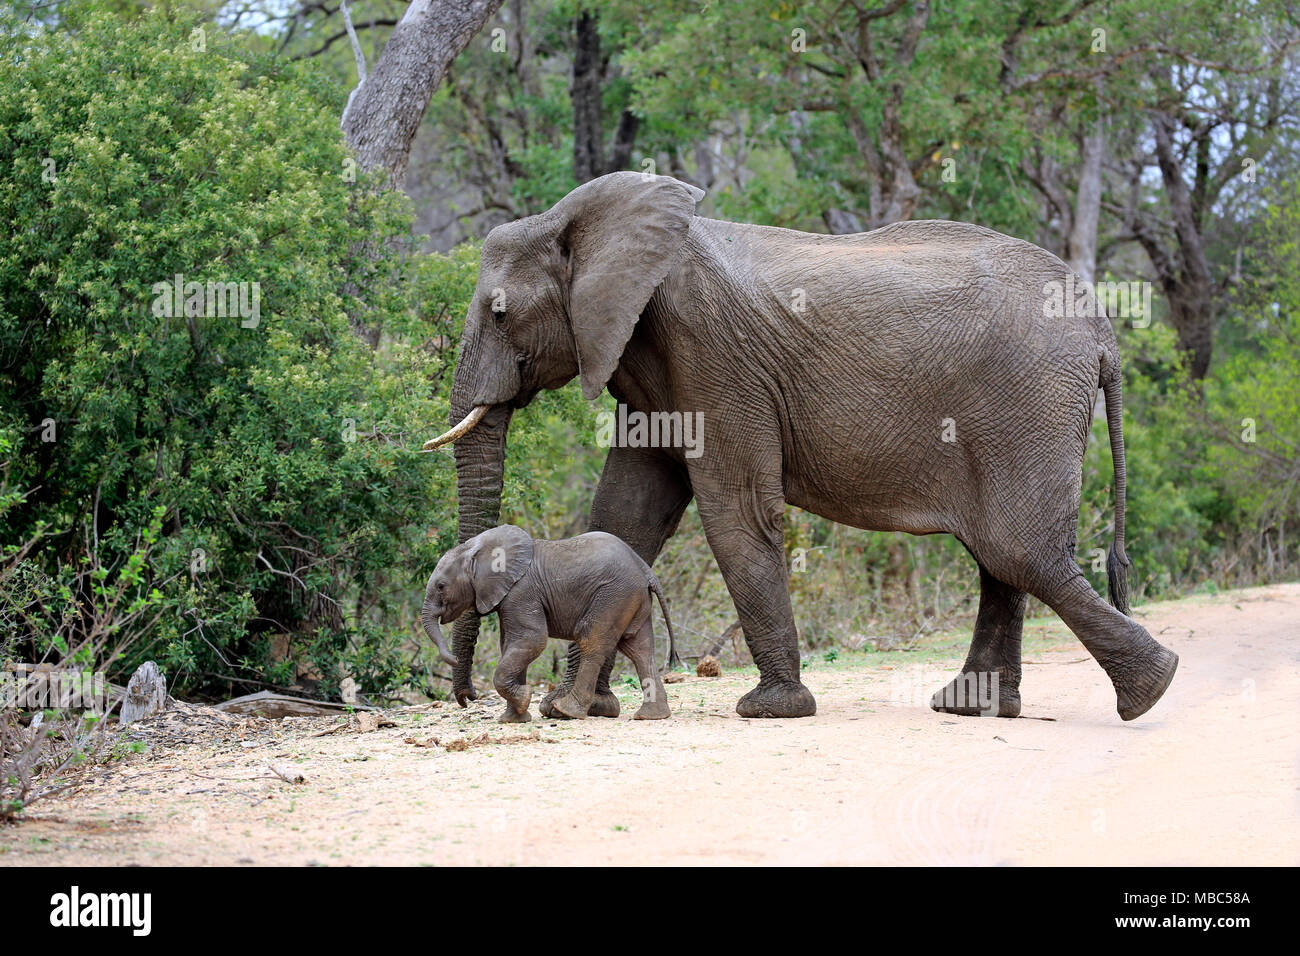 African elephants (Loxodonta africana), Mother with young animal crossing a road, Kruger National Park, South Africa Stock Photo